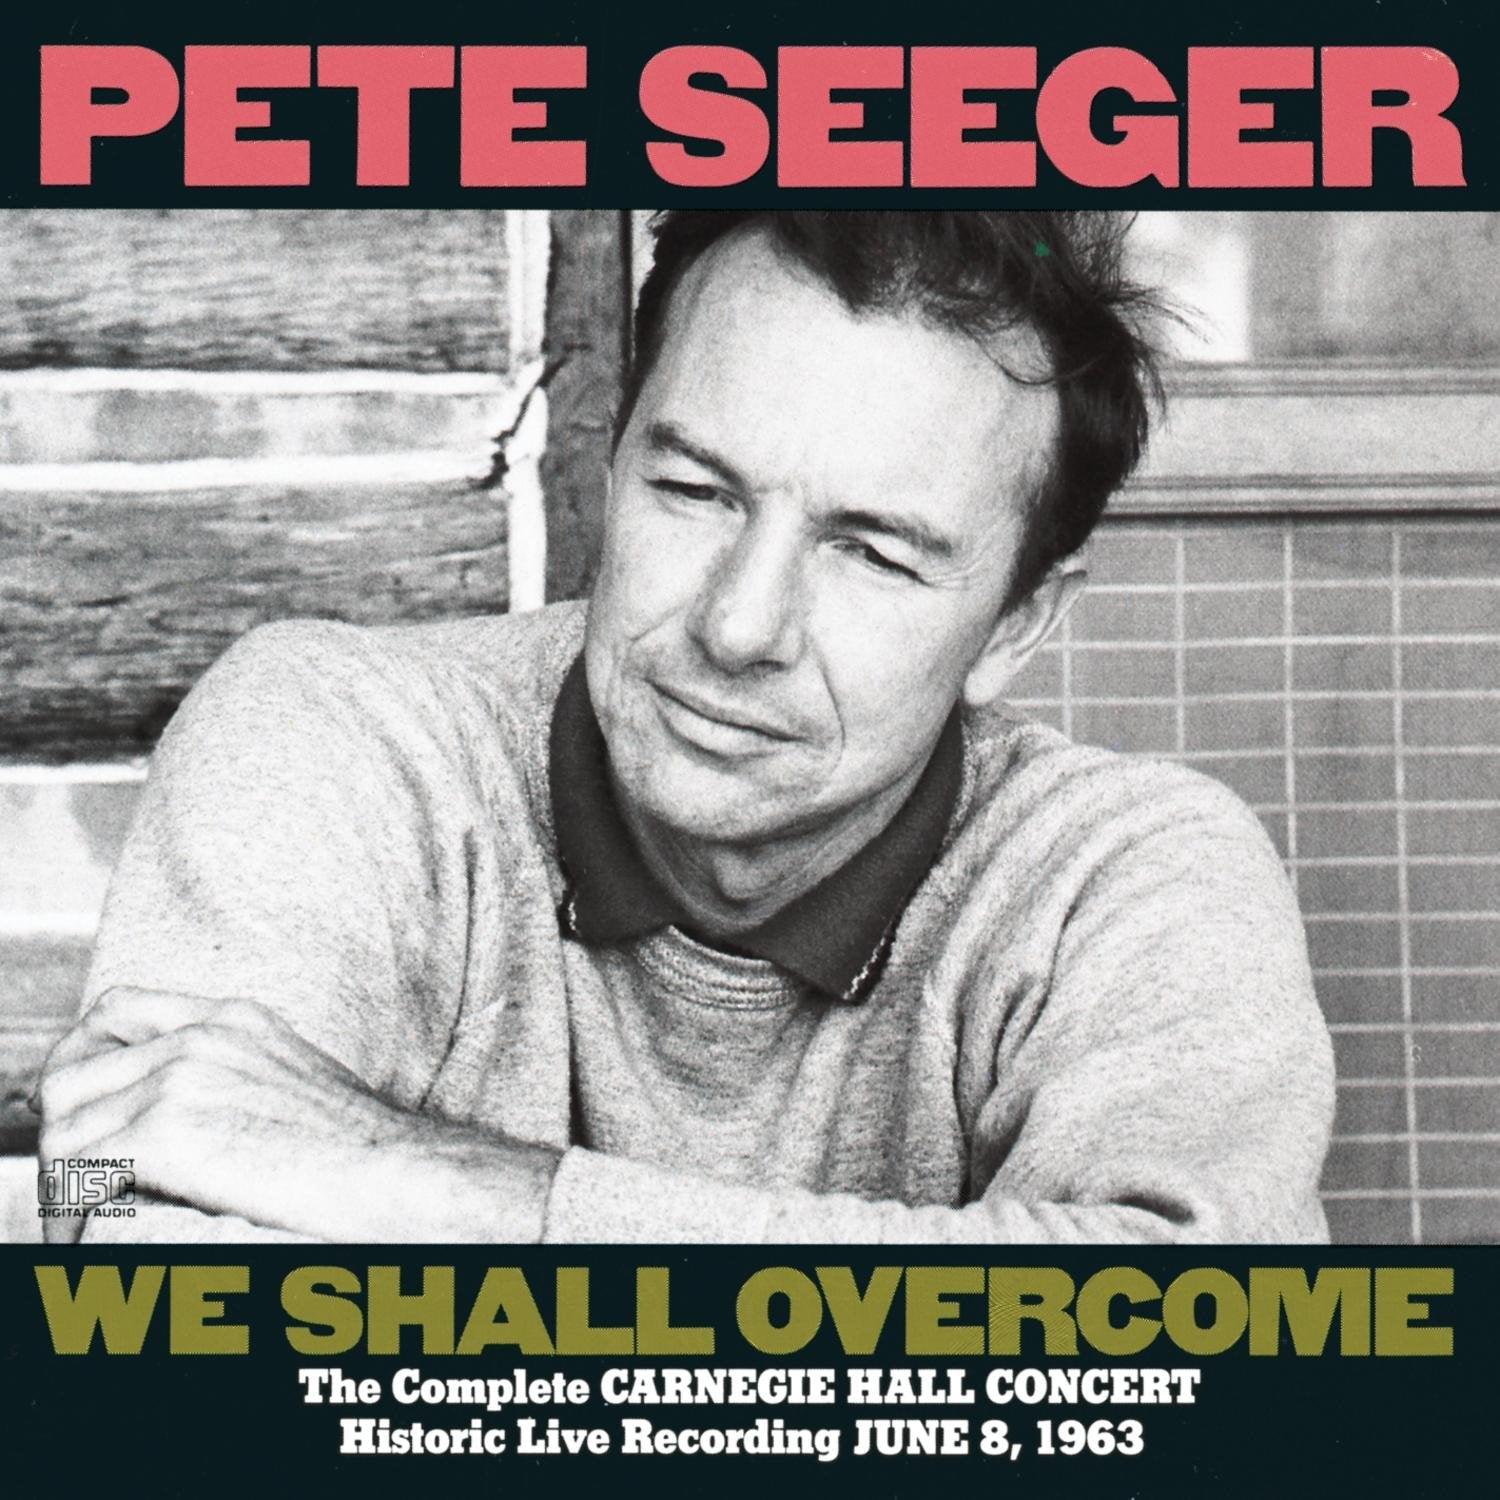 Pete Seeger- We Shall Overcome: The Complete Carnegie Hall Concert - Darkside Records